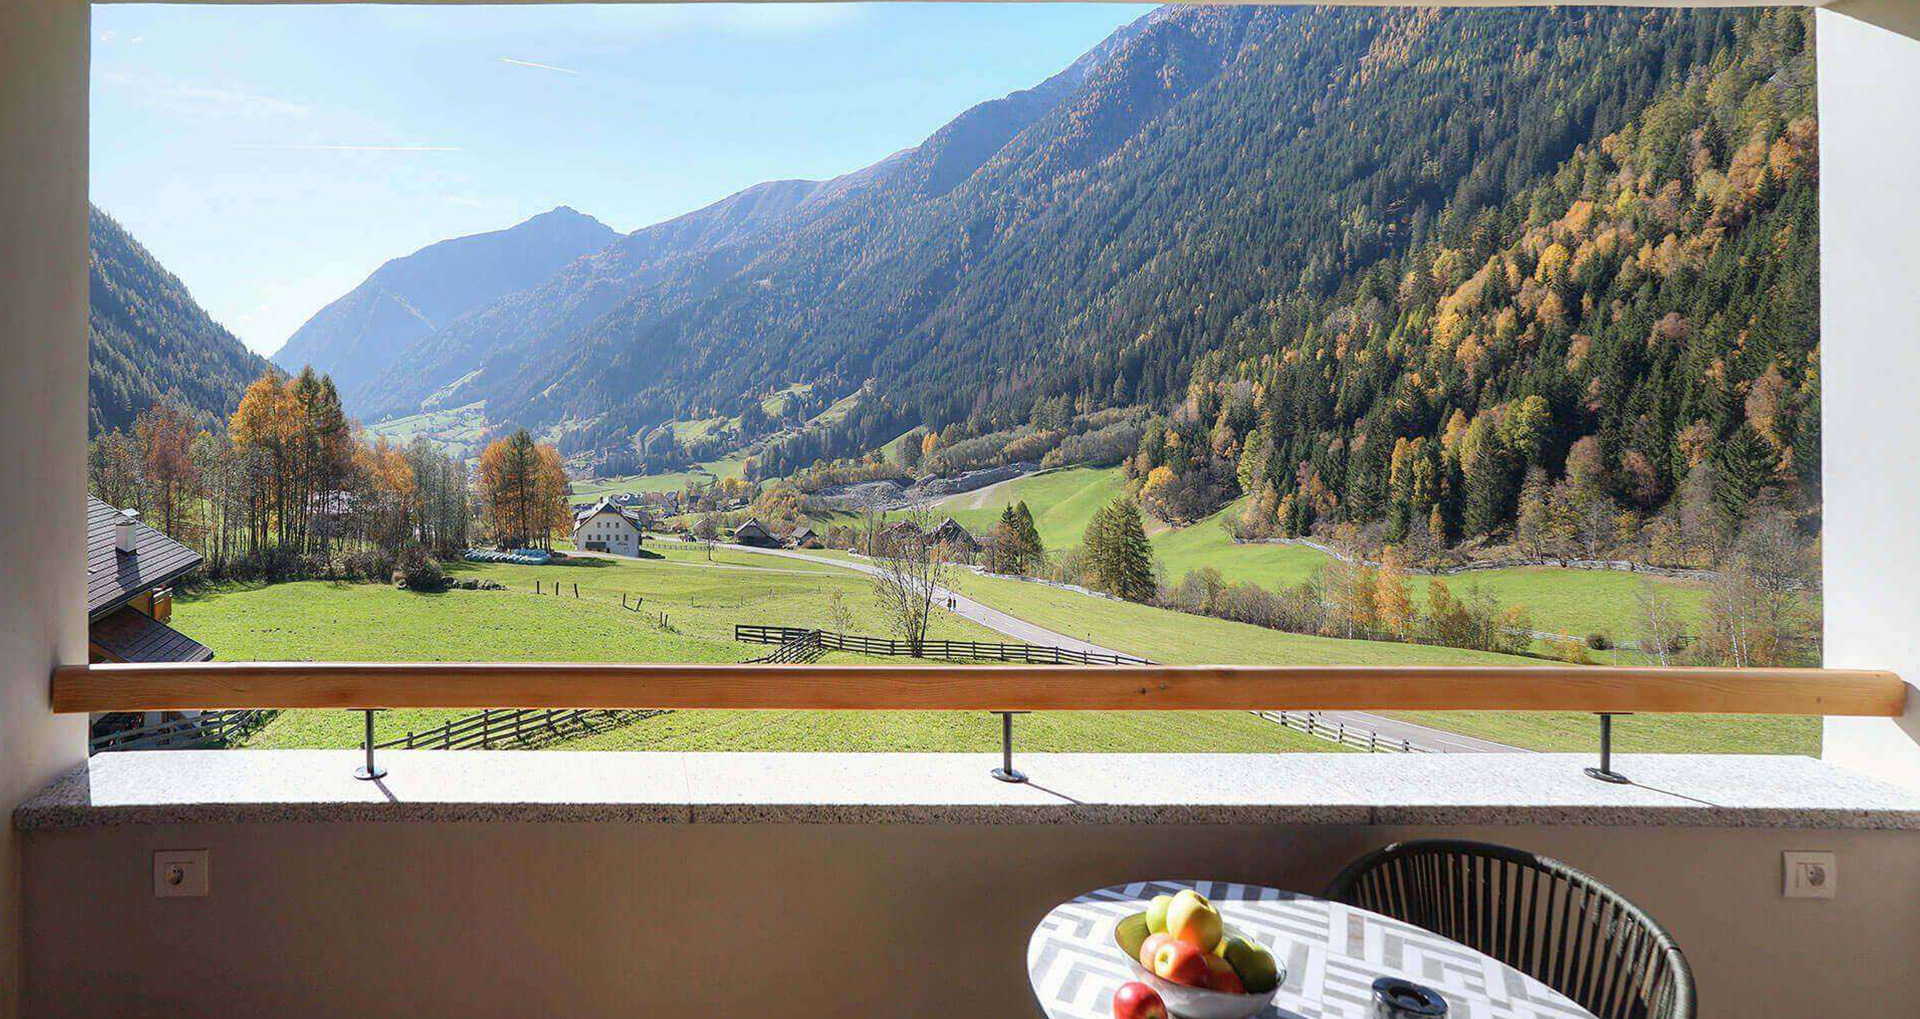 From the terrace the view opens i nto the valley of Anterselva